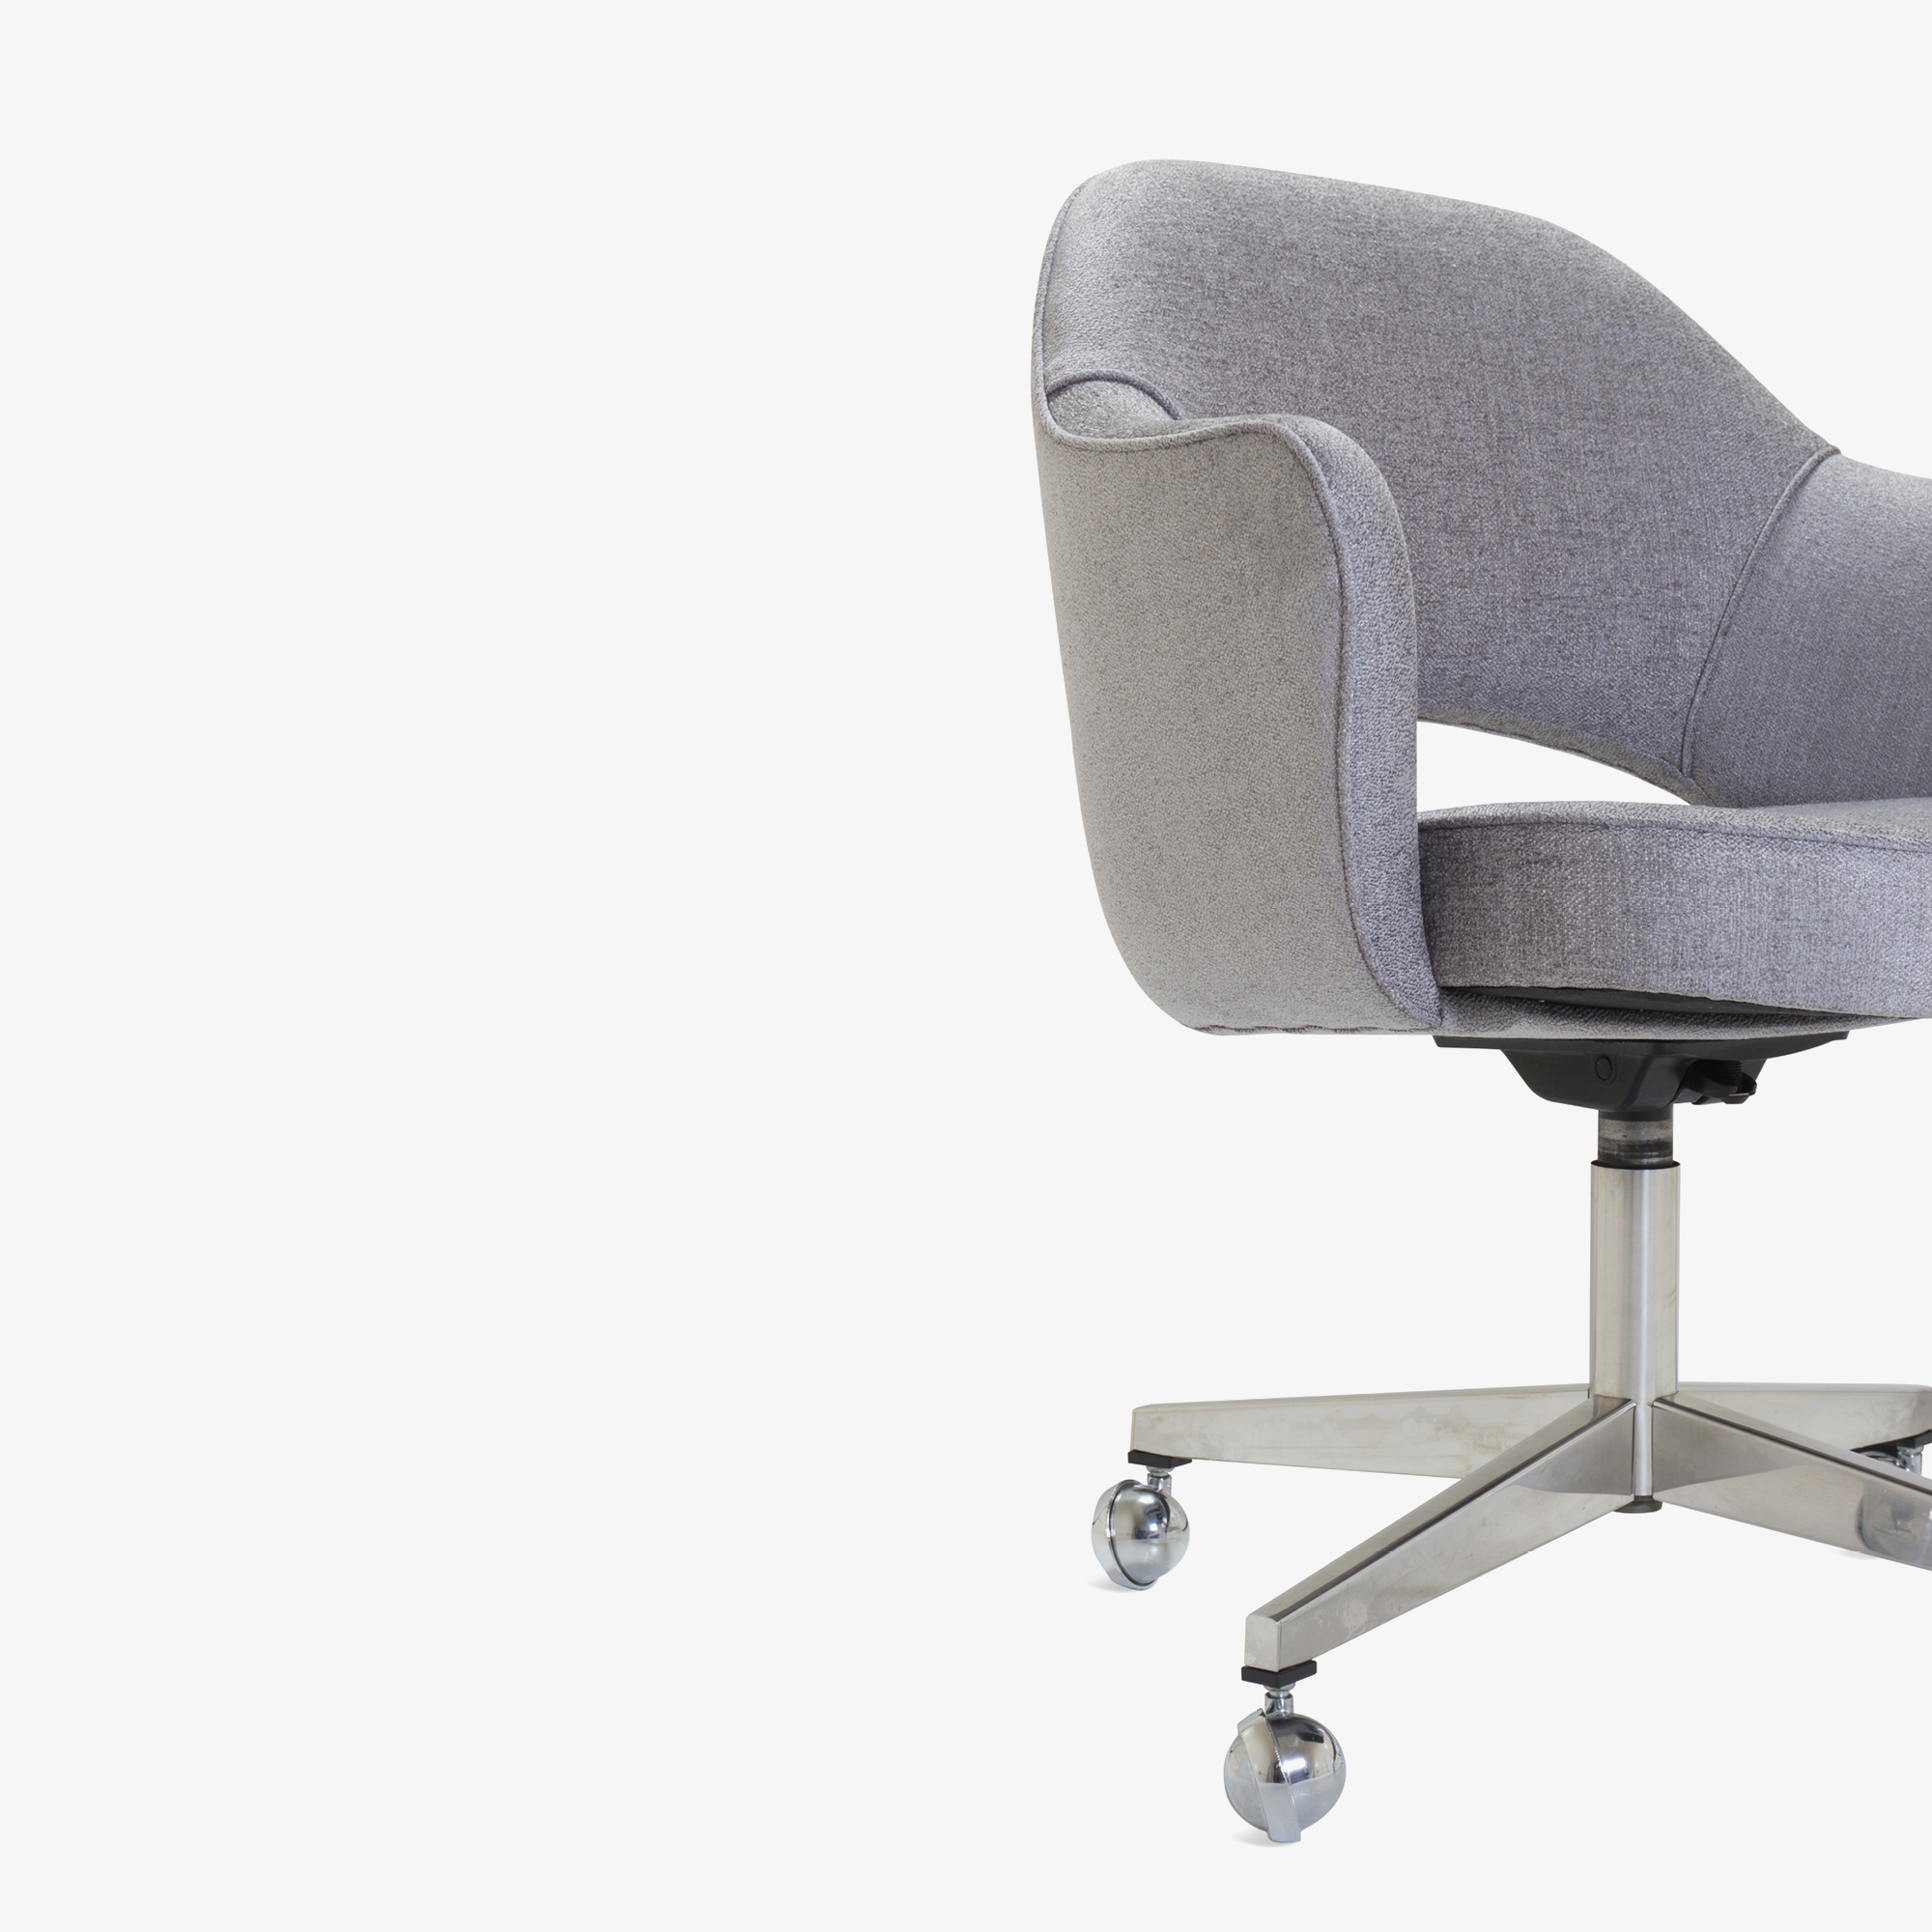 Saarinen Executive Arm Chair in Sterling, Swivel Base4.png